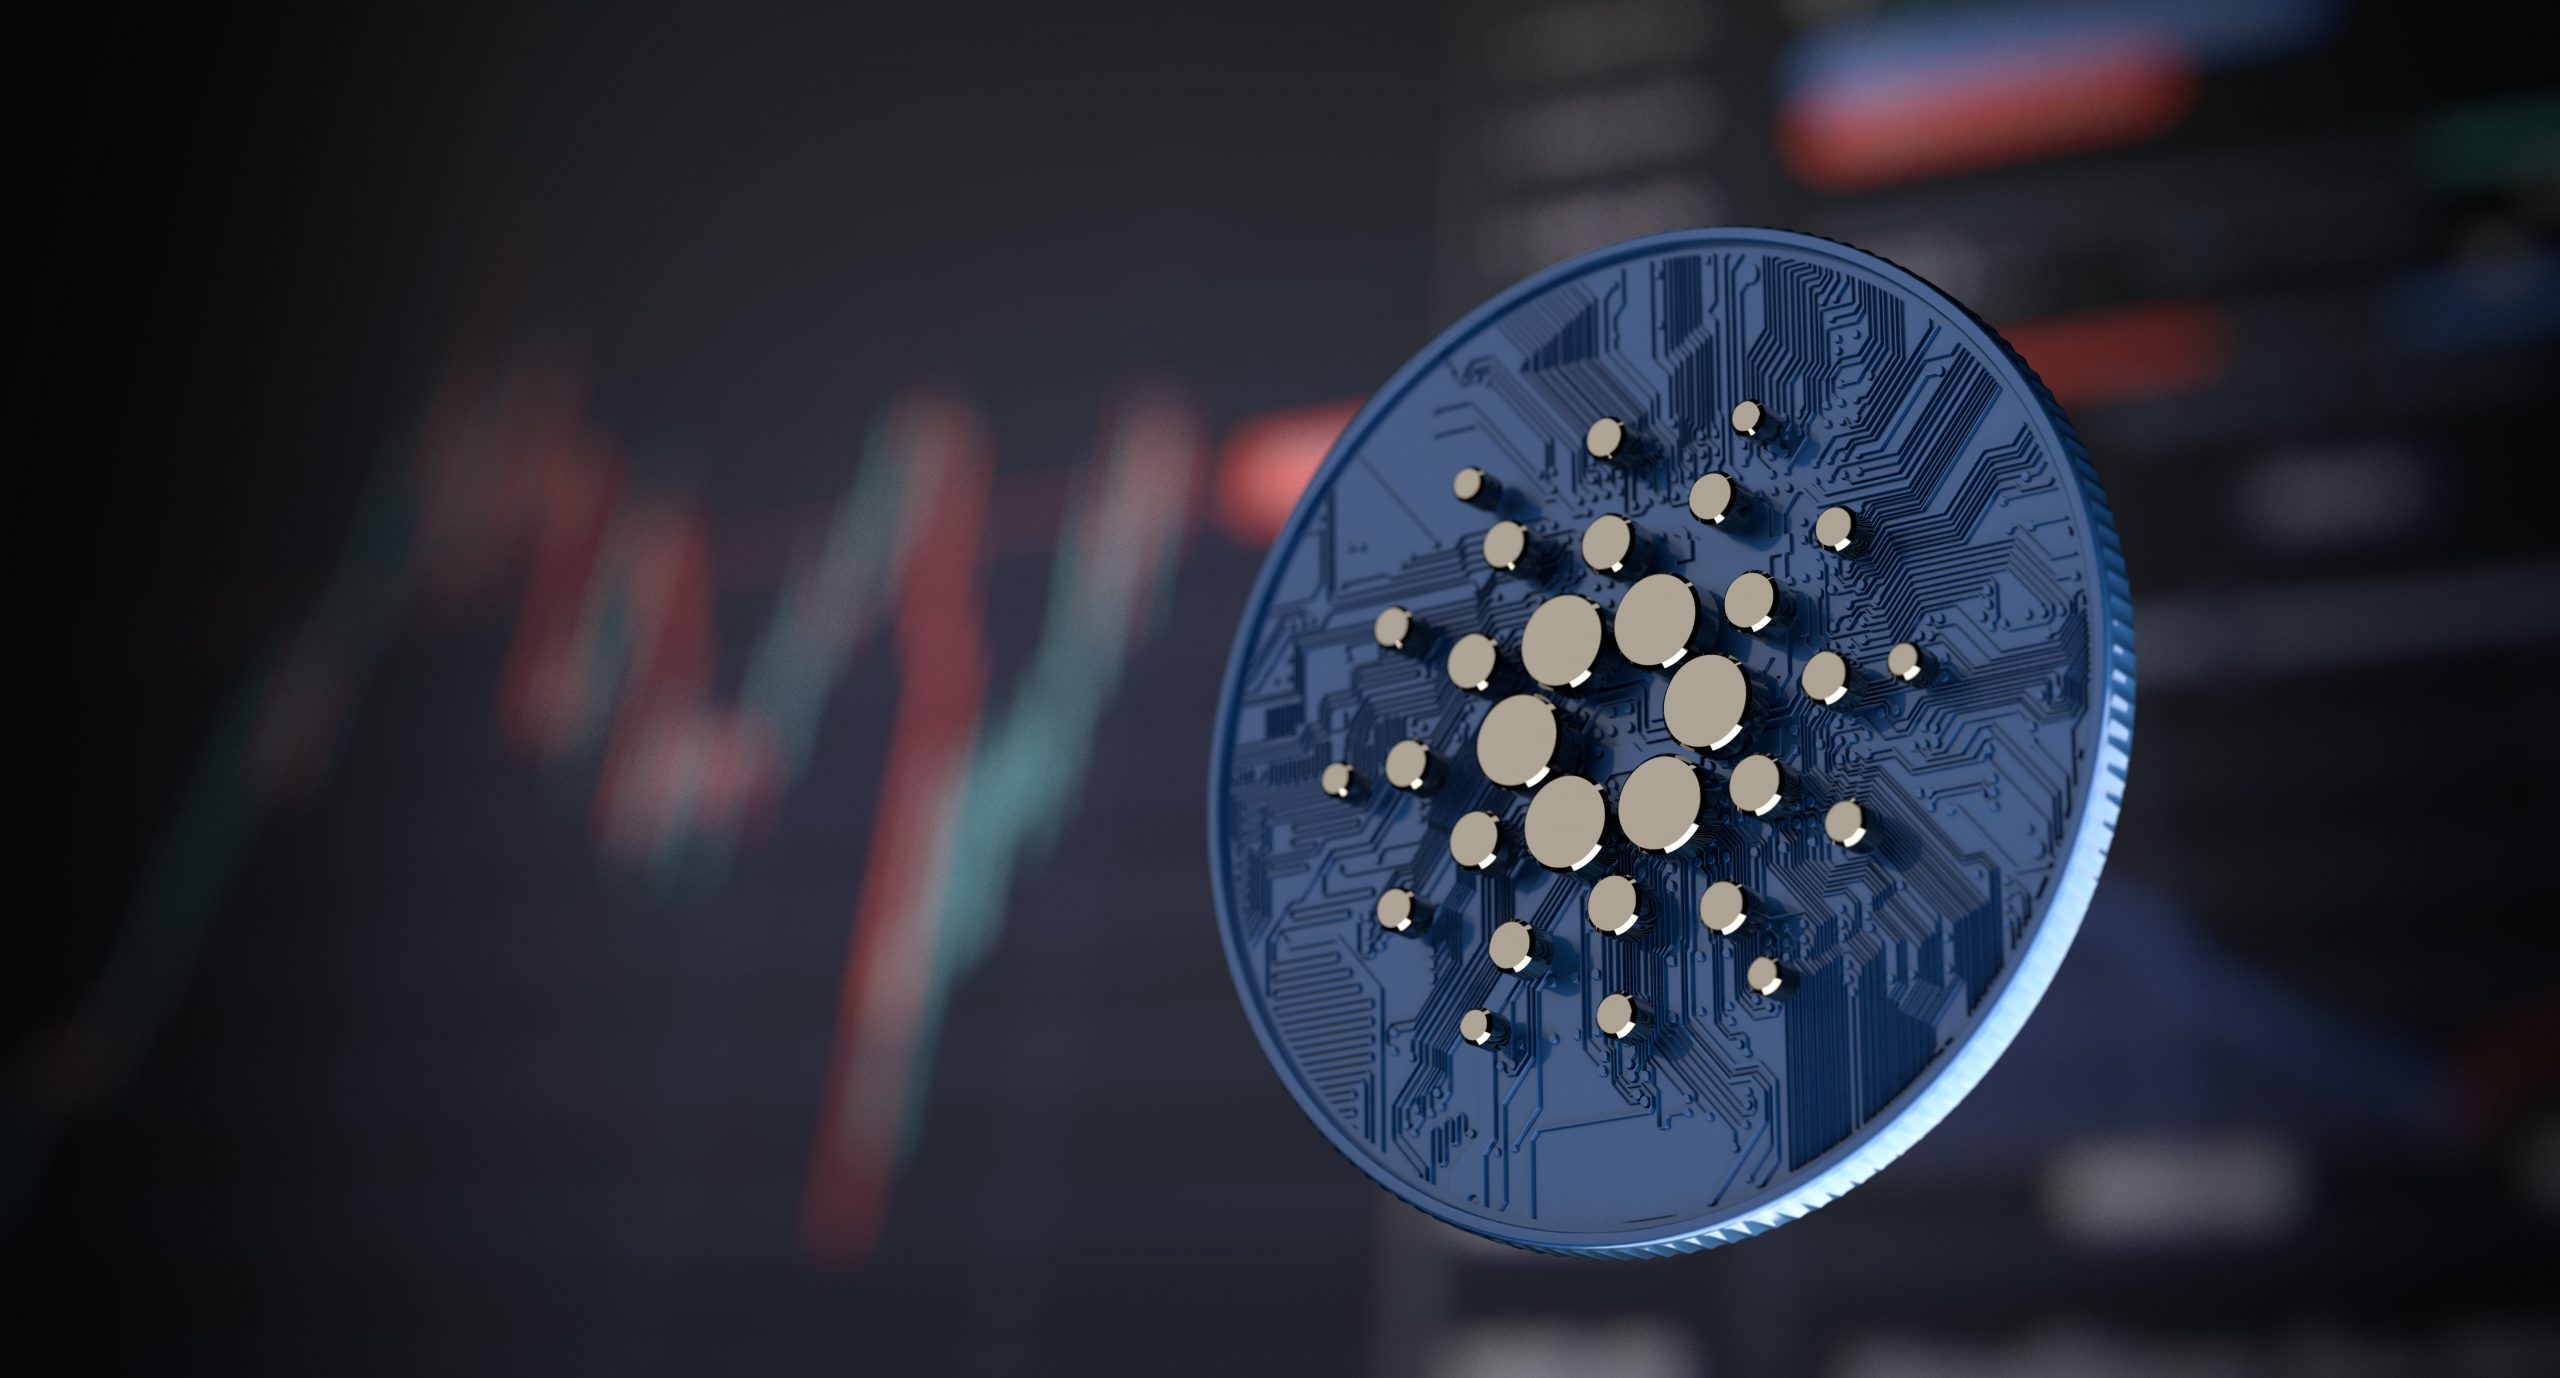 Cardano to Boost On-Chain Developer Features for Network Growth